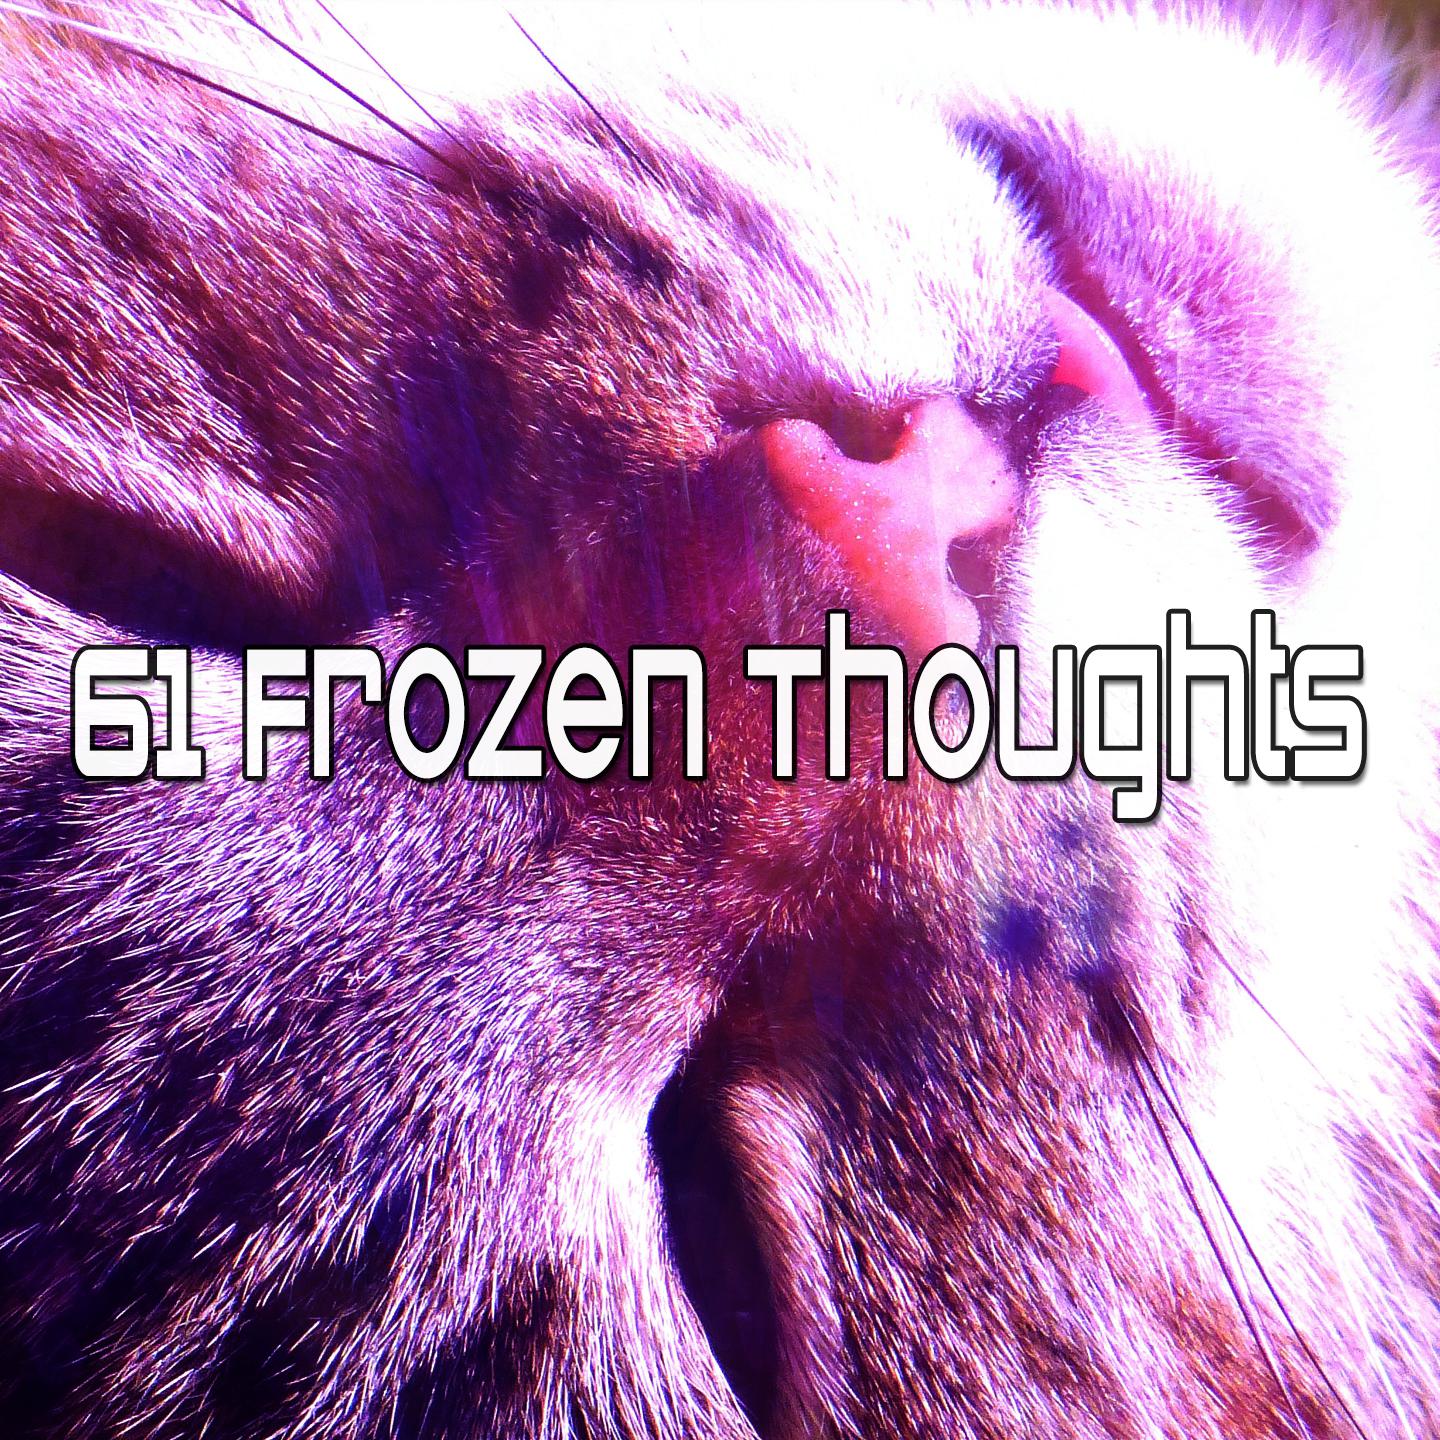 61 Frozen Thoughts